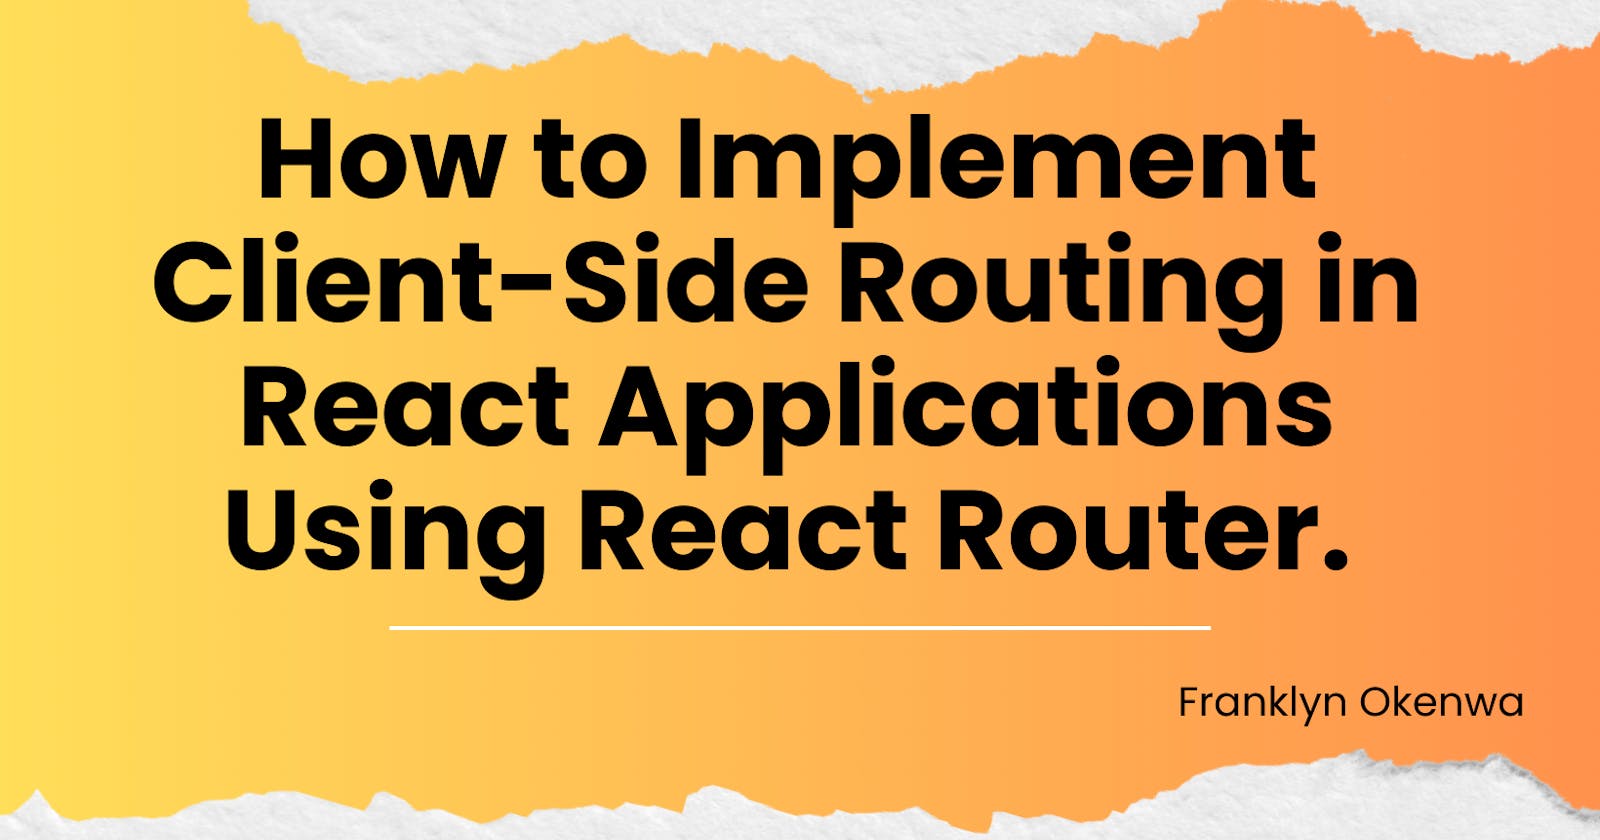 How to Implement Client-Side Routing in React Applications Using React Router.